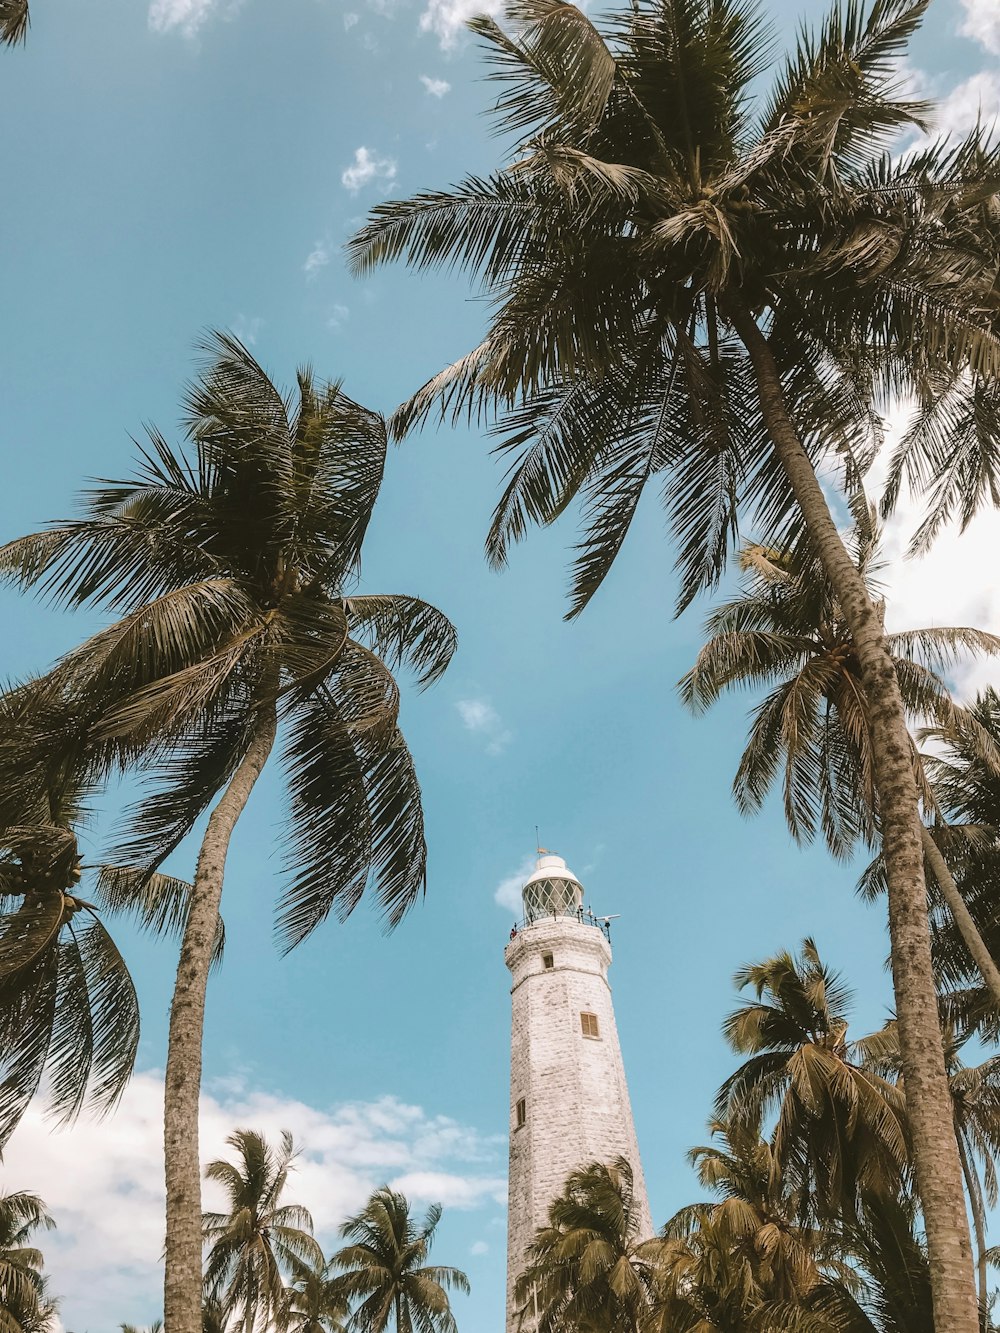 low angle photo of lighthouse tower surrounded by palm trees under blue sky during daytime